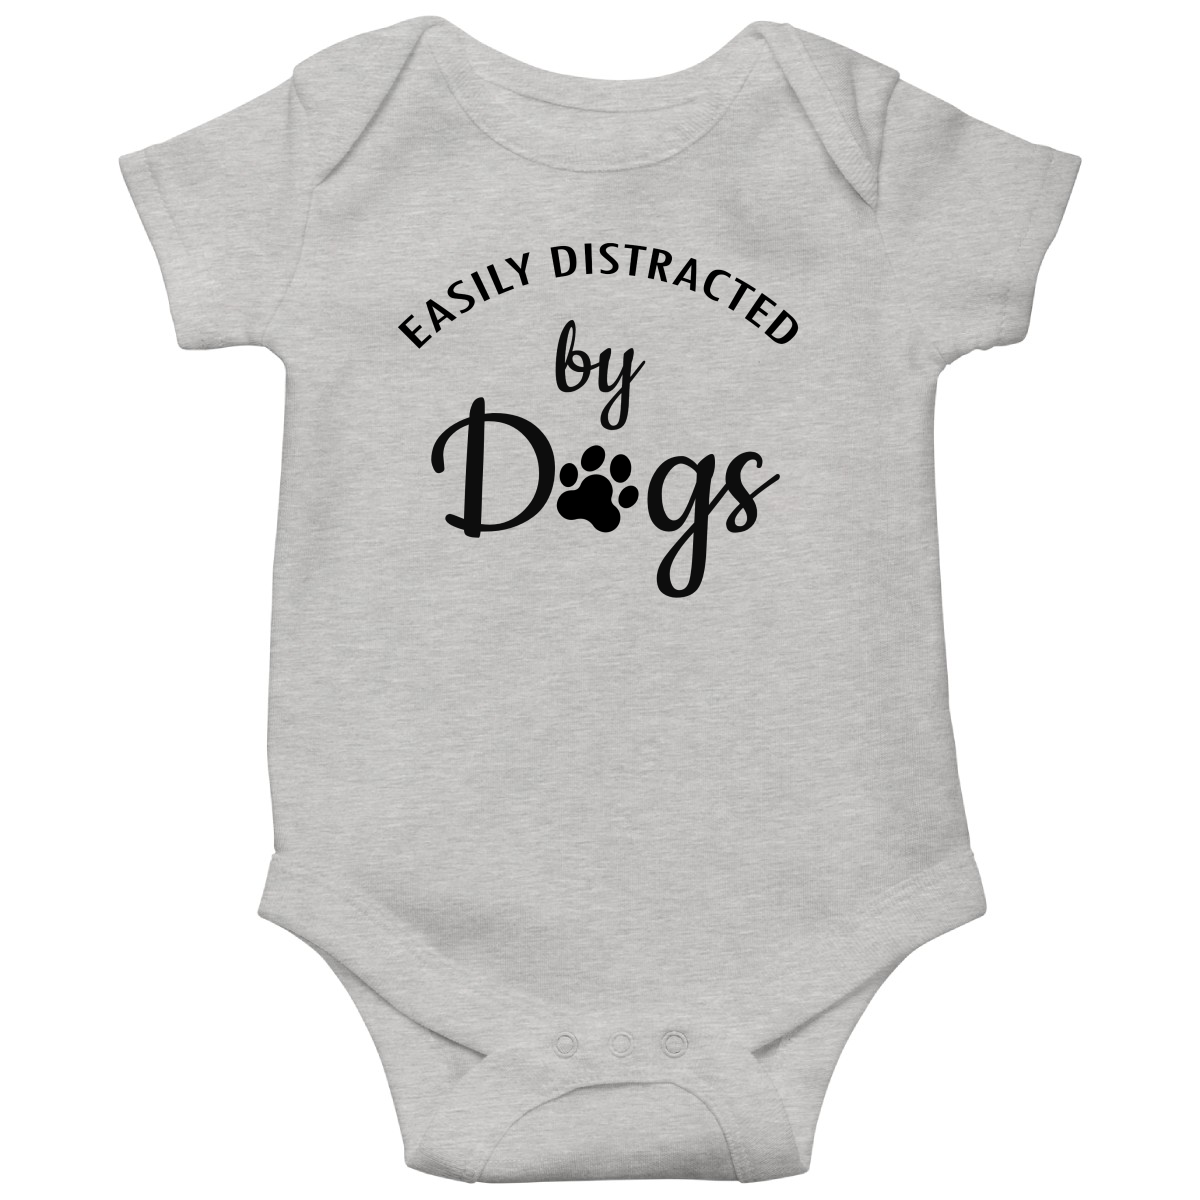 Easily Distracted By Dogs Baby Bodysuits | Gray